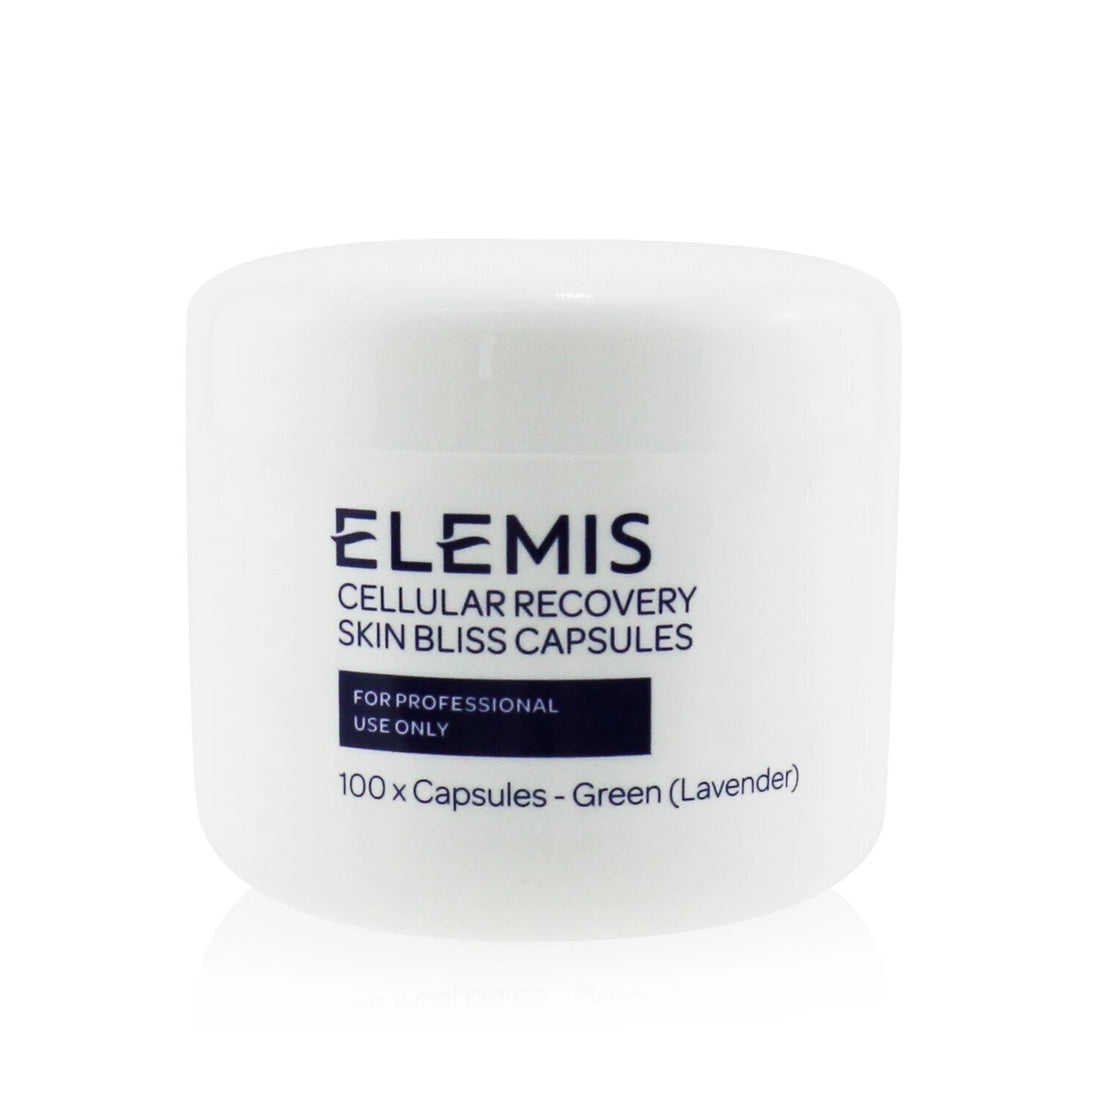 Elemis Cellular Recovery Skin Bliss Capsules Лаванда 100 капсул